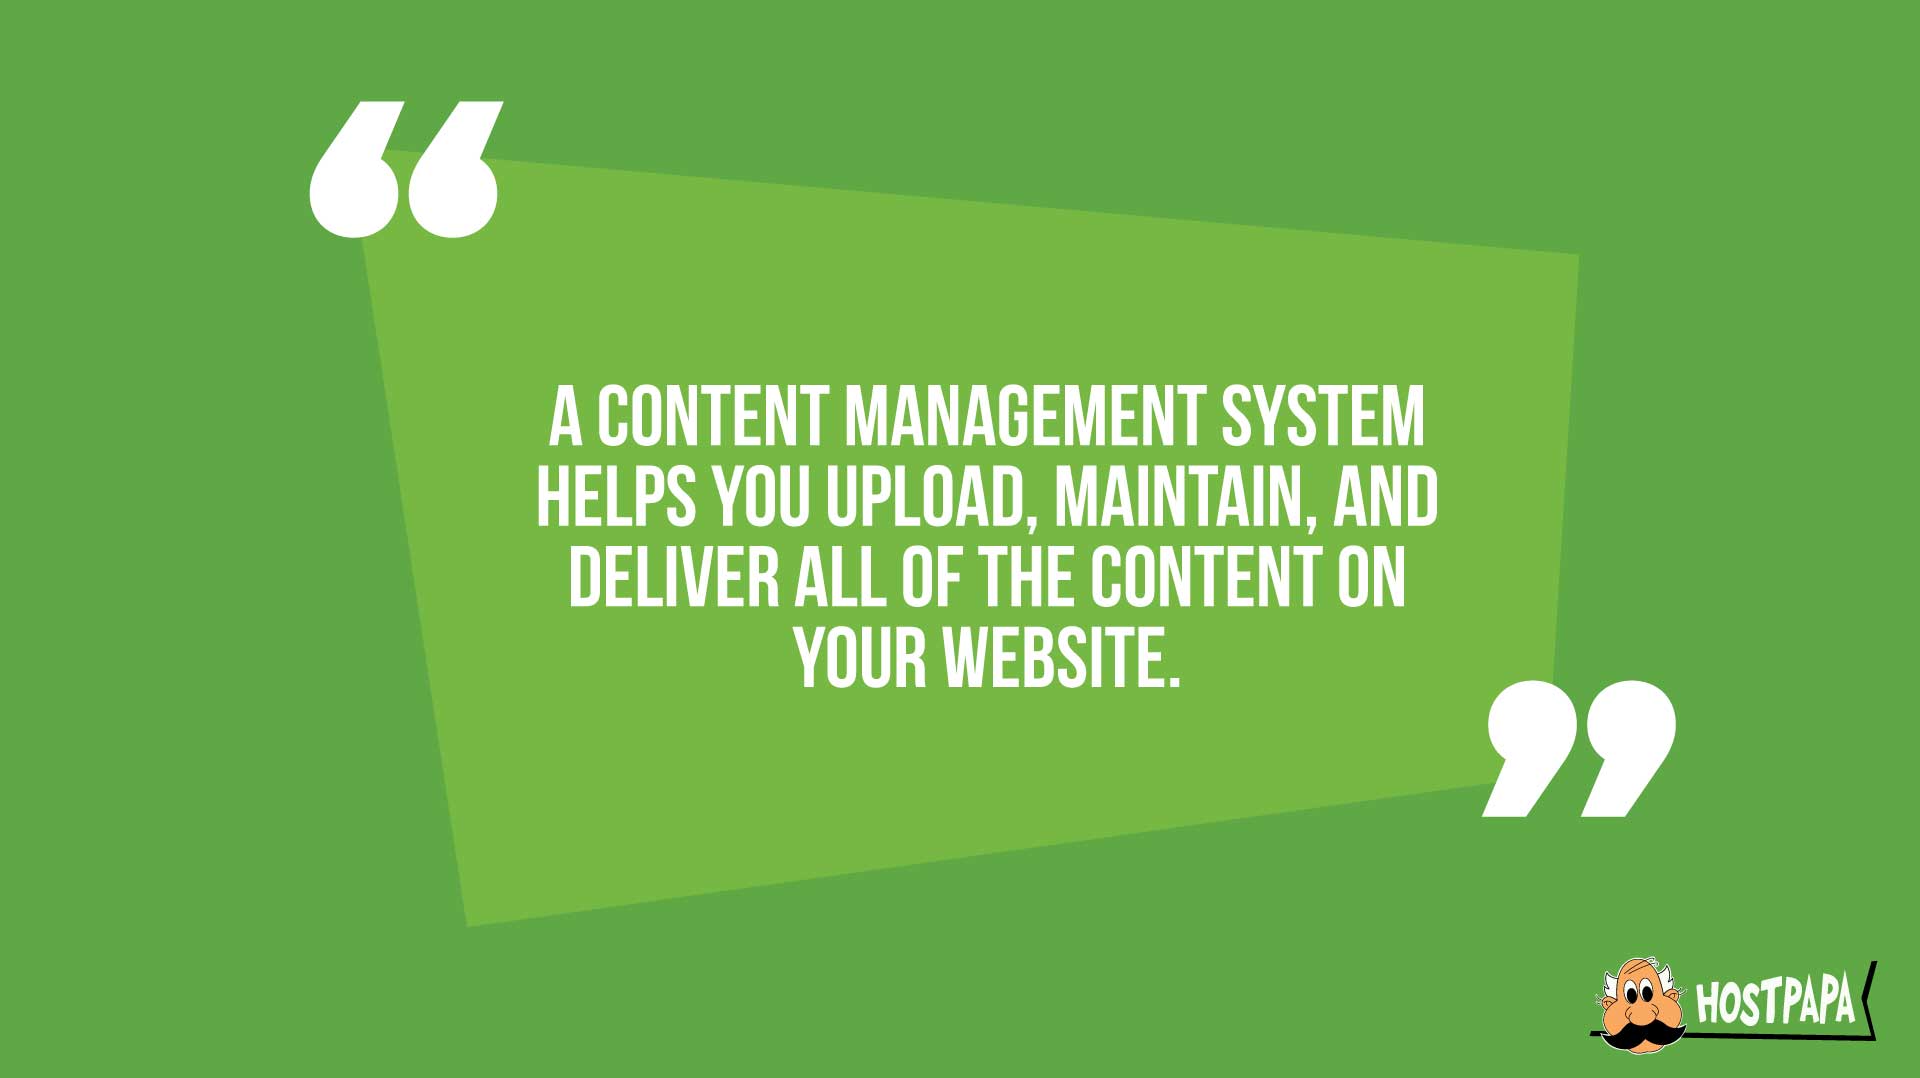 A content management system helps you upload, maintain, and deliver all of the content on your website.